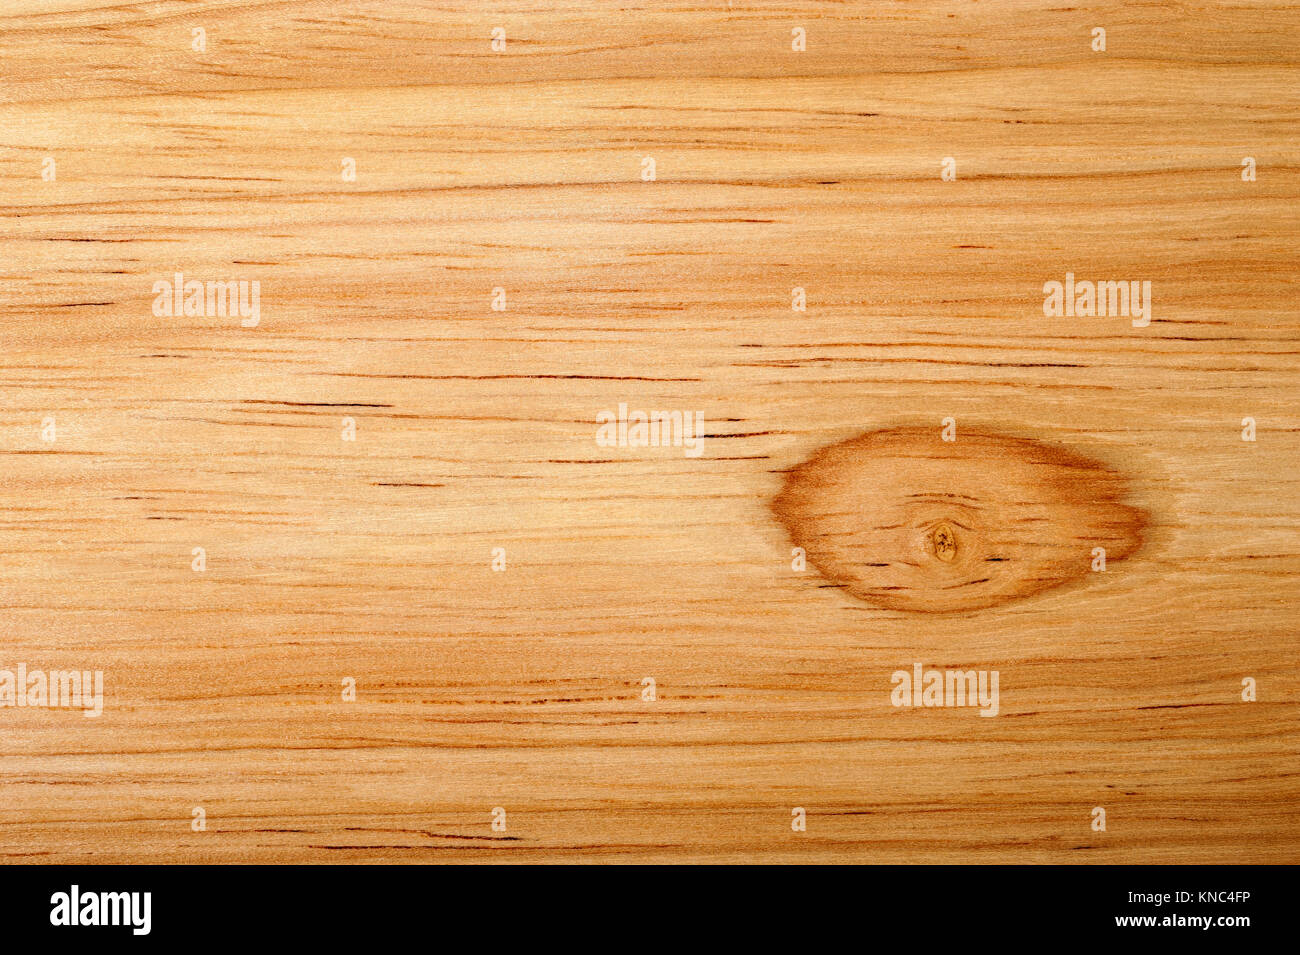 Close up texture of wood background Stock Photo